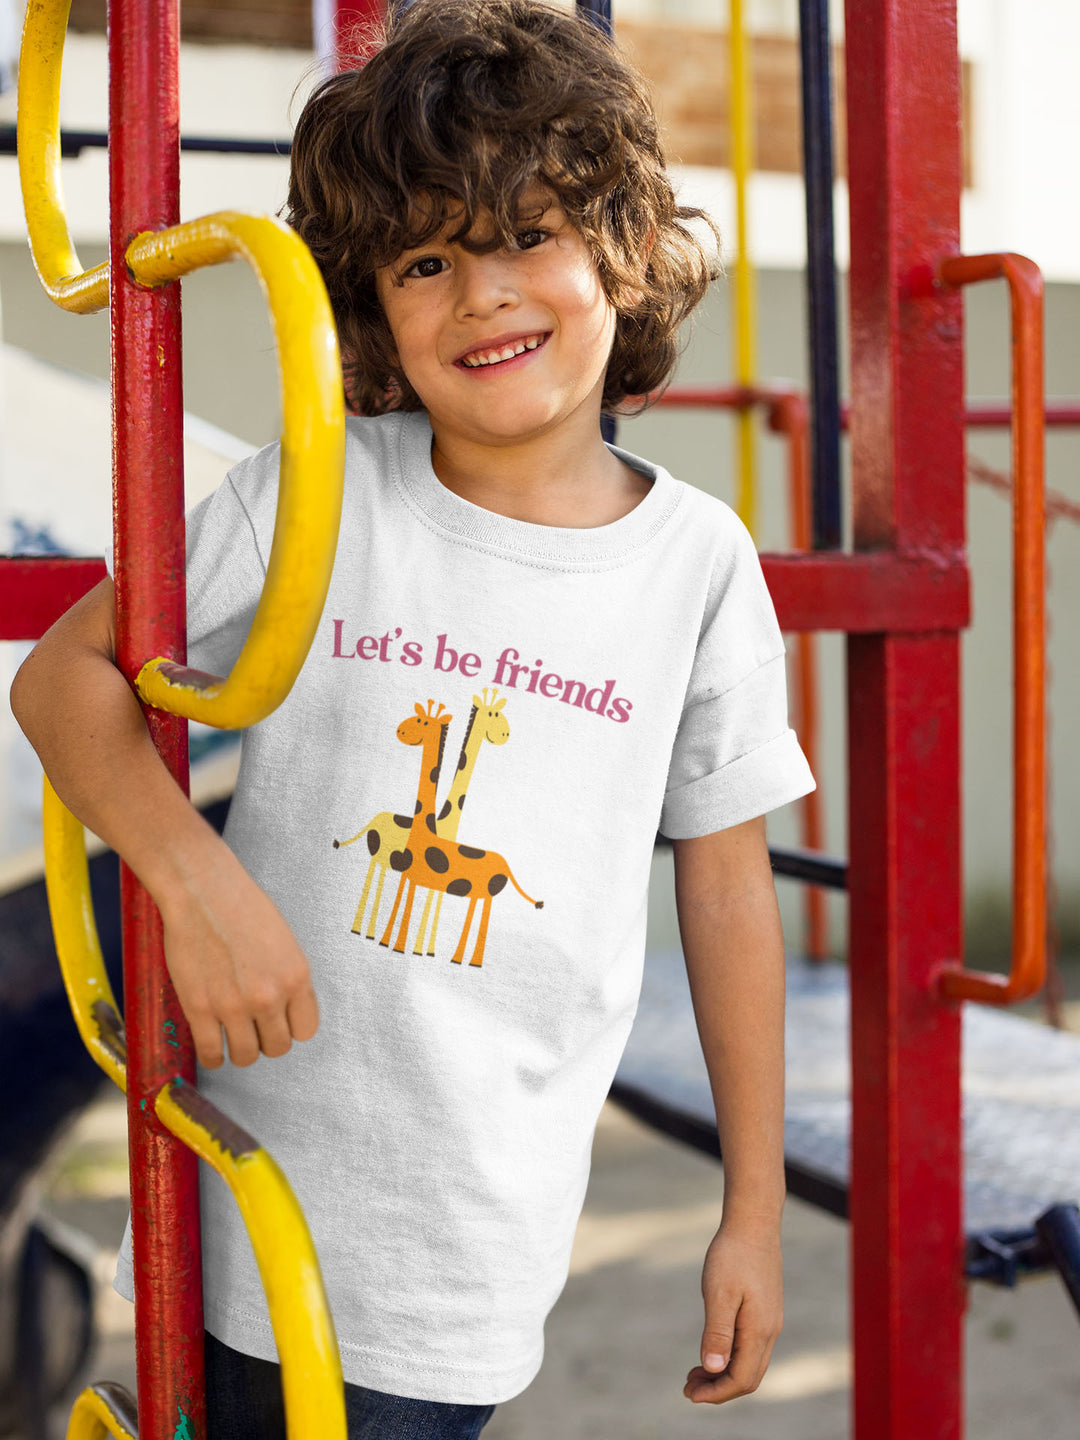 Let's Be Friends. Short Sleeve T Shirt For Toddler And Kids. - TeesForToddlersandKids -  t-shirt - seasons, summer - lets-be-friends-short-sleeve-t-shirt-for-toddler-and-kids